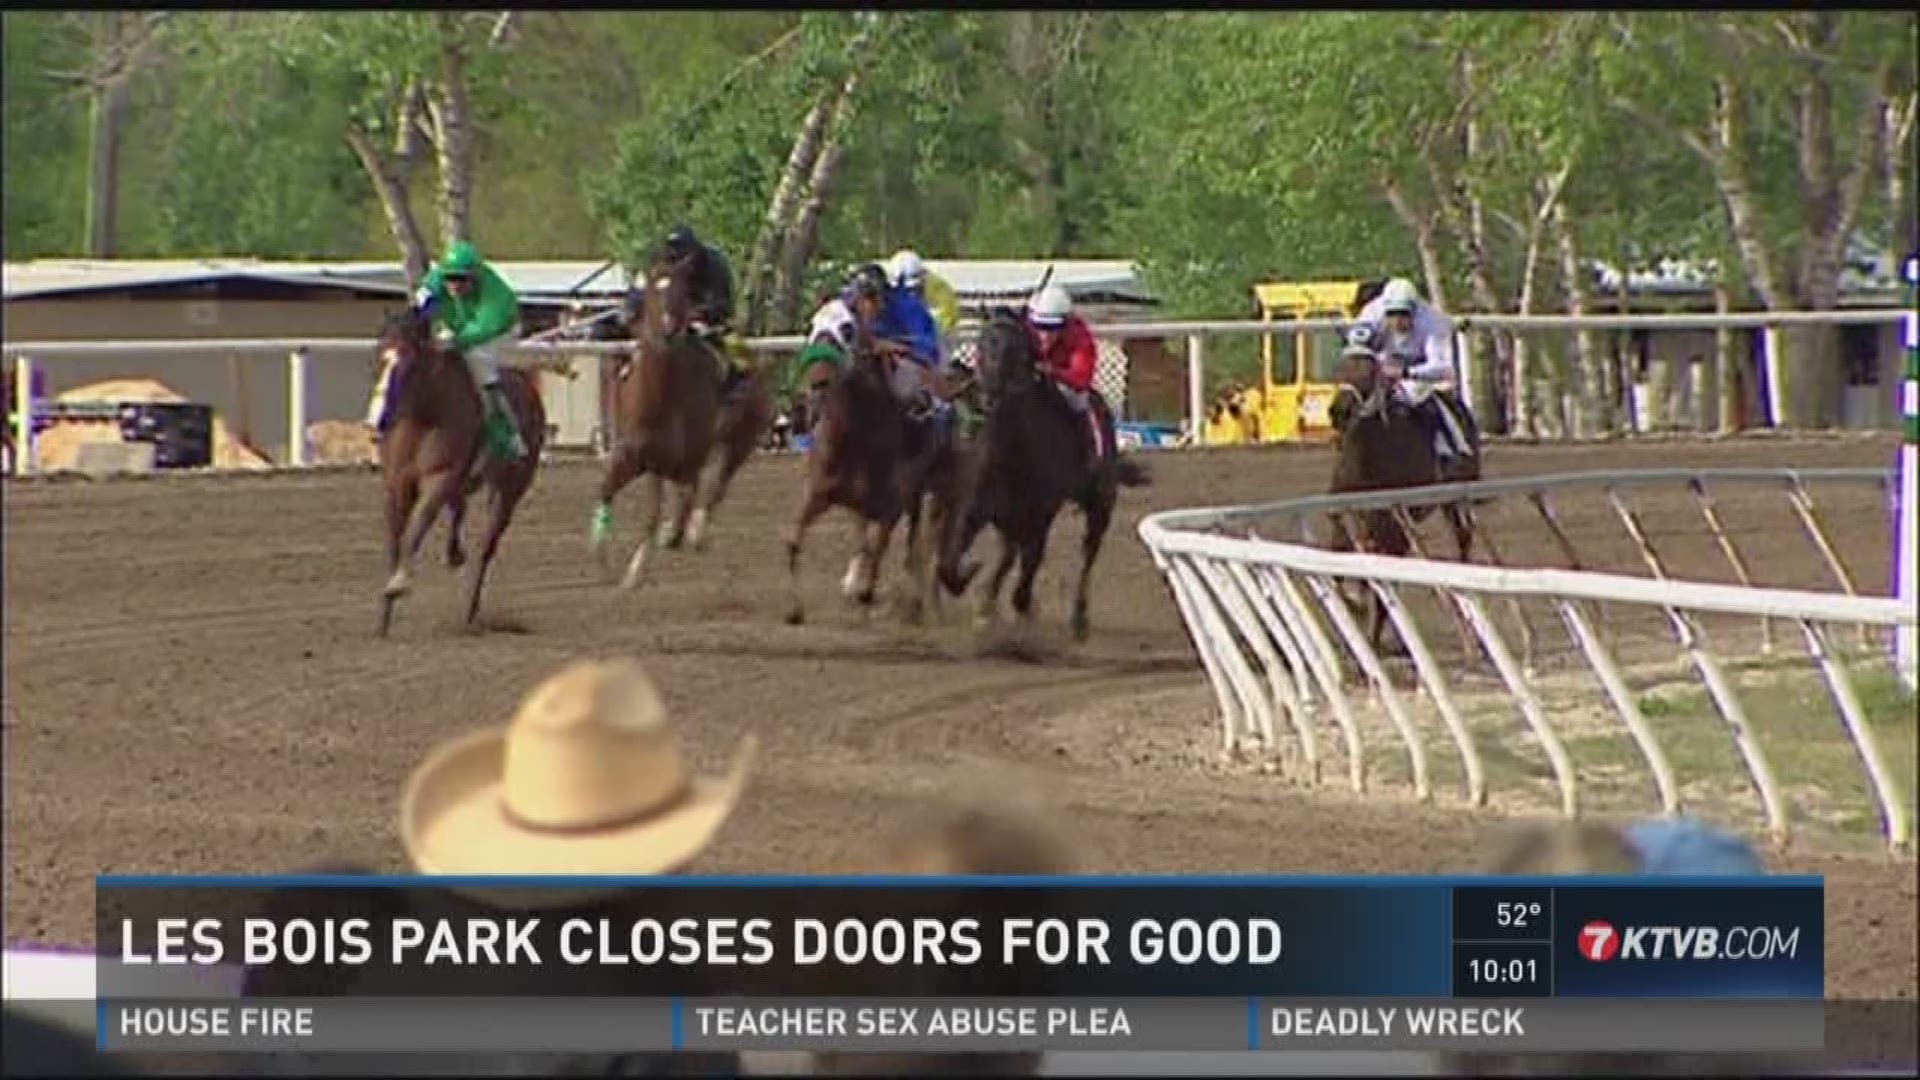 After over 40 years of entertaining fans and creating jobs for horsemen and women, Les Bois Park closed its doors on Sunday.